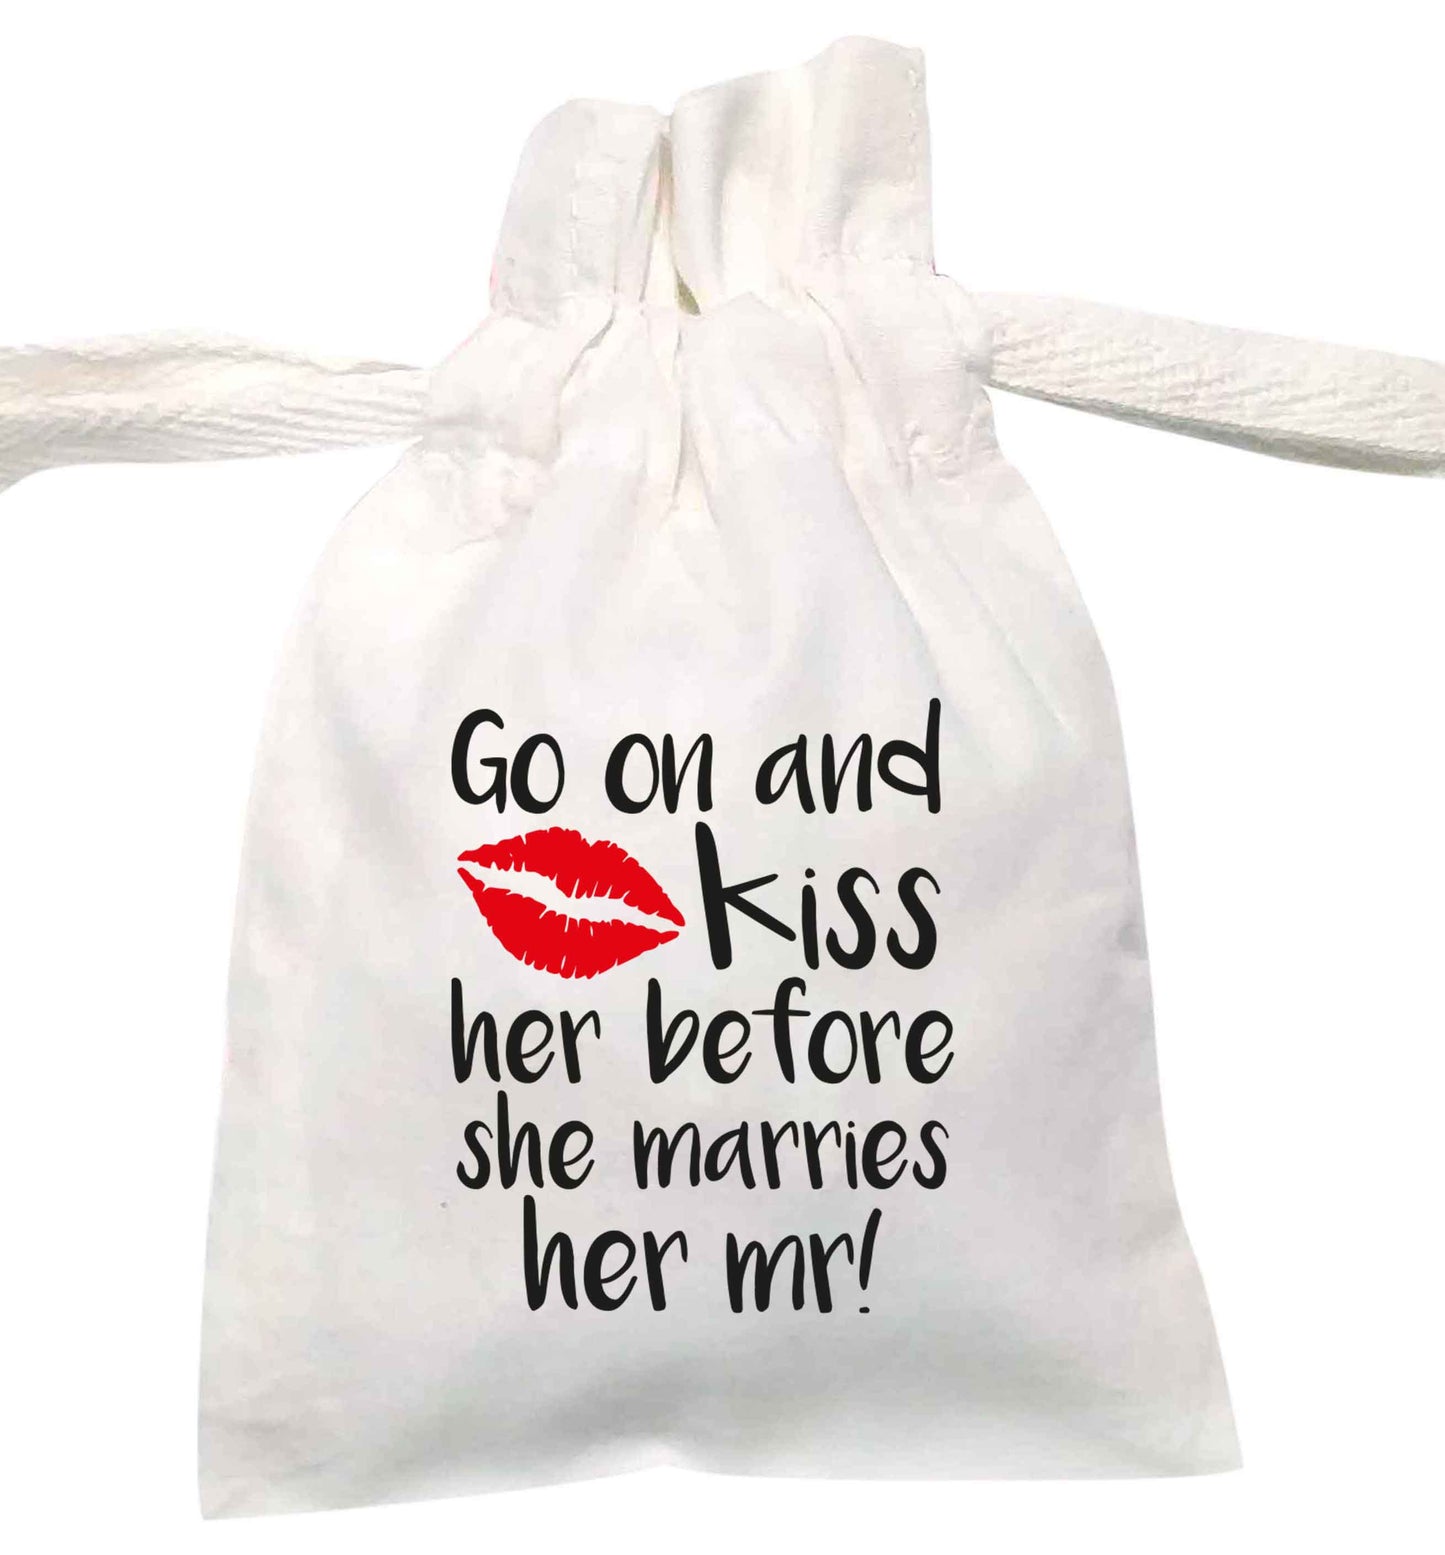 Kiss her before she marries her mr! | XS - L | Pouch / Drawstring bag / Sack | Organic Cotton | Bulk discounts available!